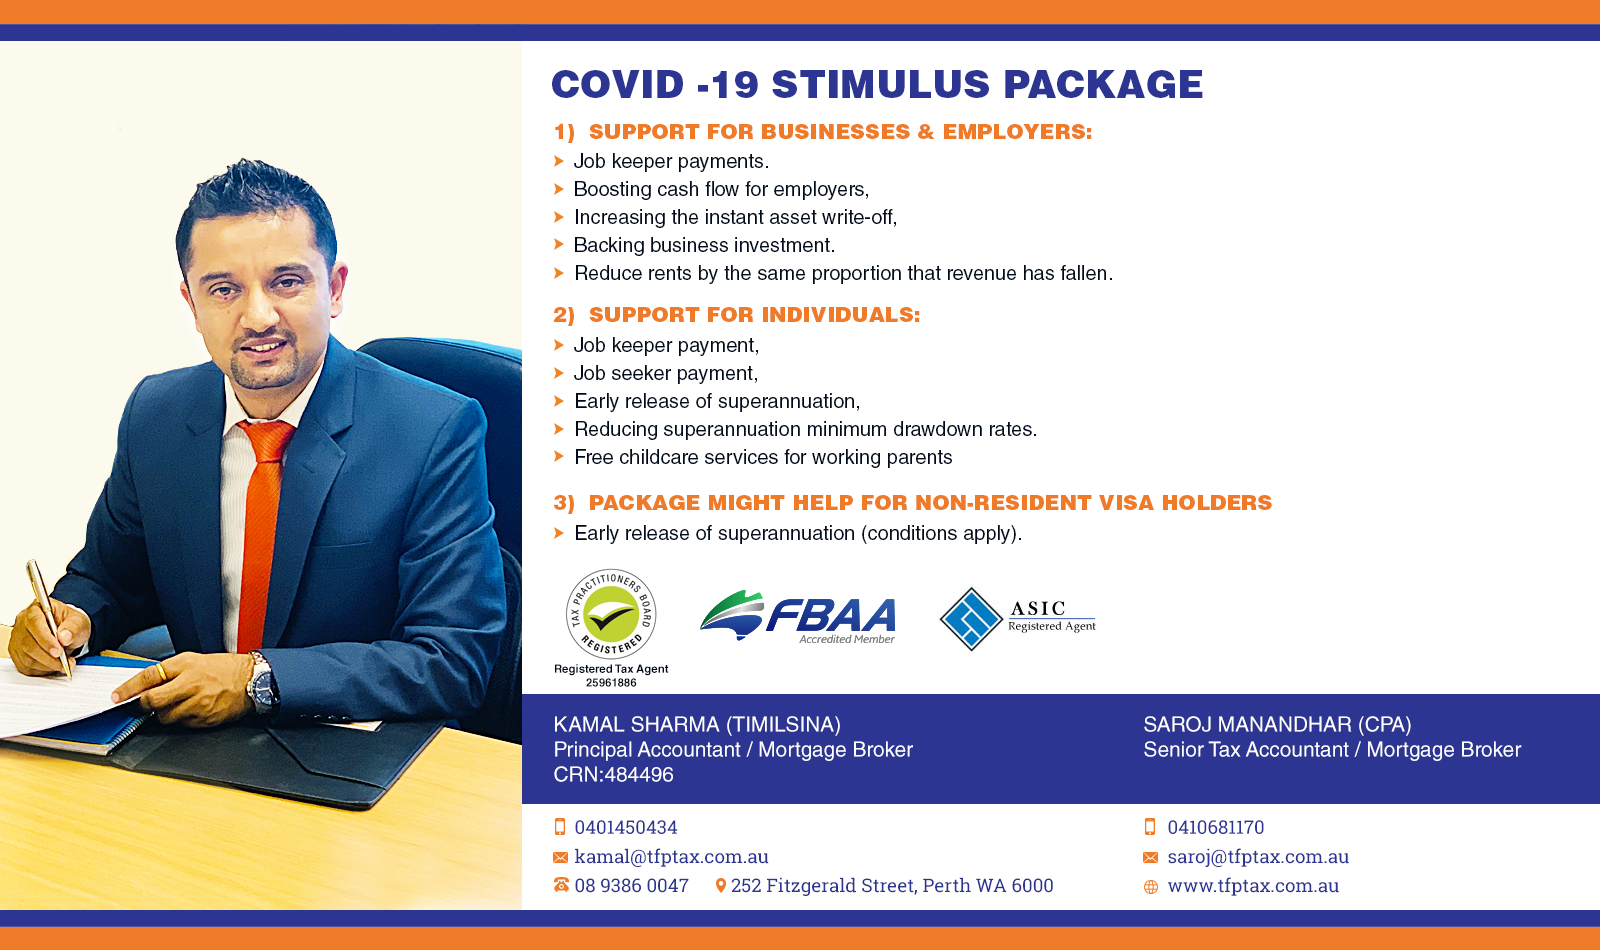 COVID-19: STIMULUS PACKAGES